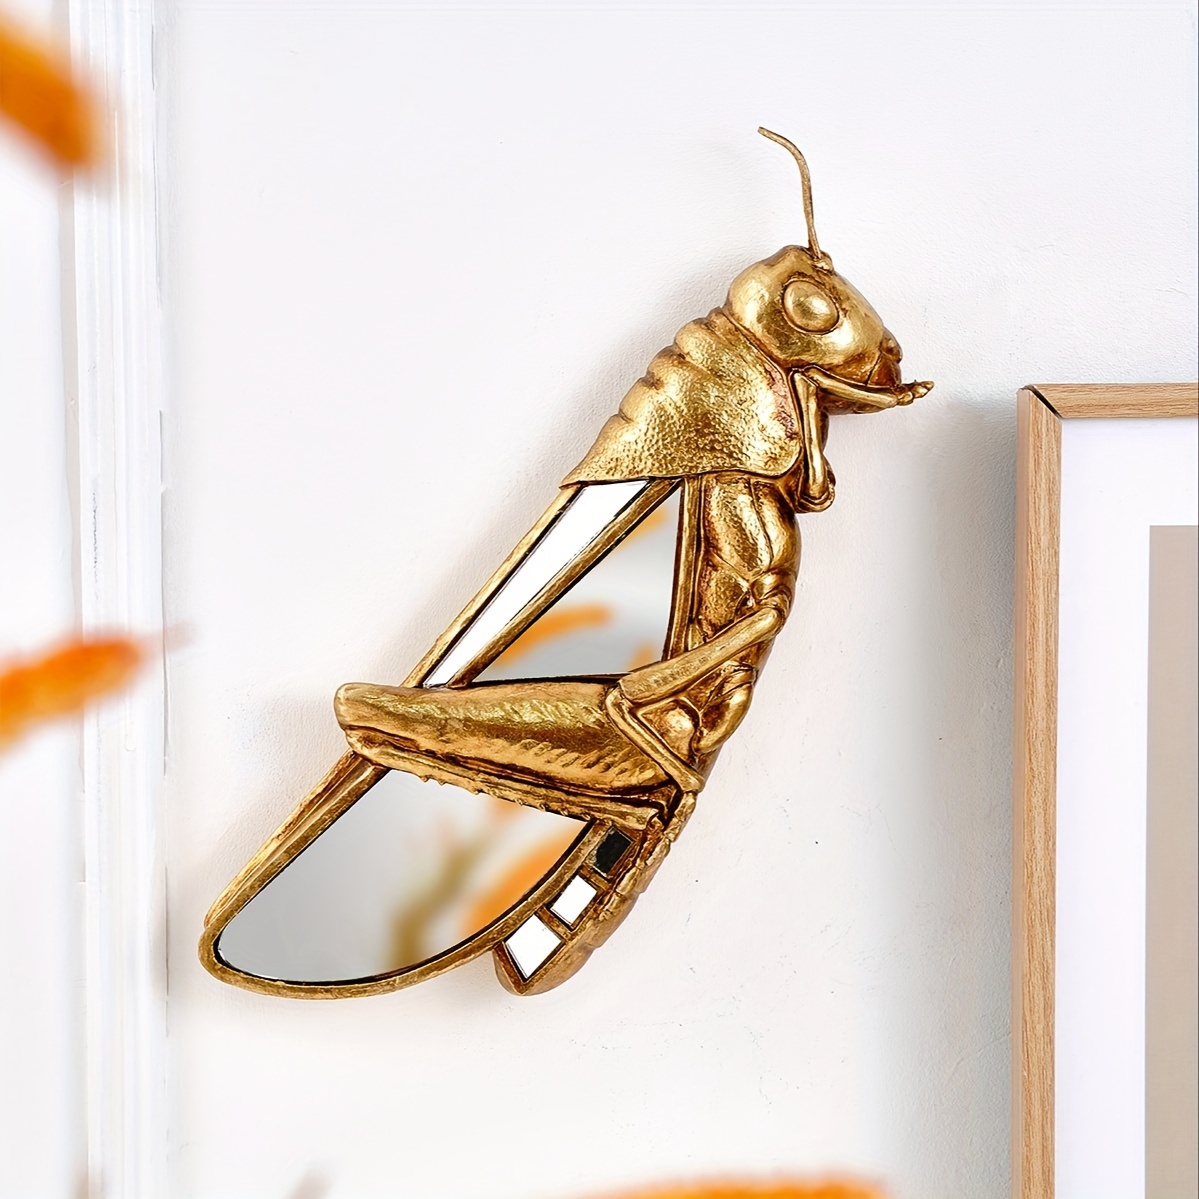 

Creative Resin Locust-shaped Wall Hanging With Mirror Inlay, Unique Artistic Decor For Home, Hotel, Restaurant - No Power Needed, Featherless, Occasion - 1pc